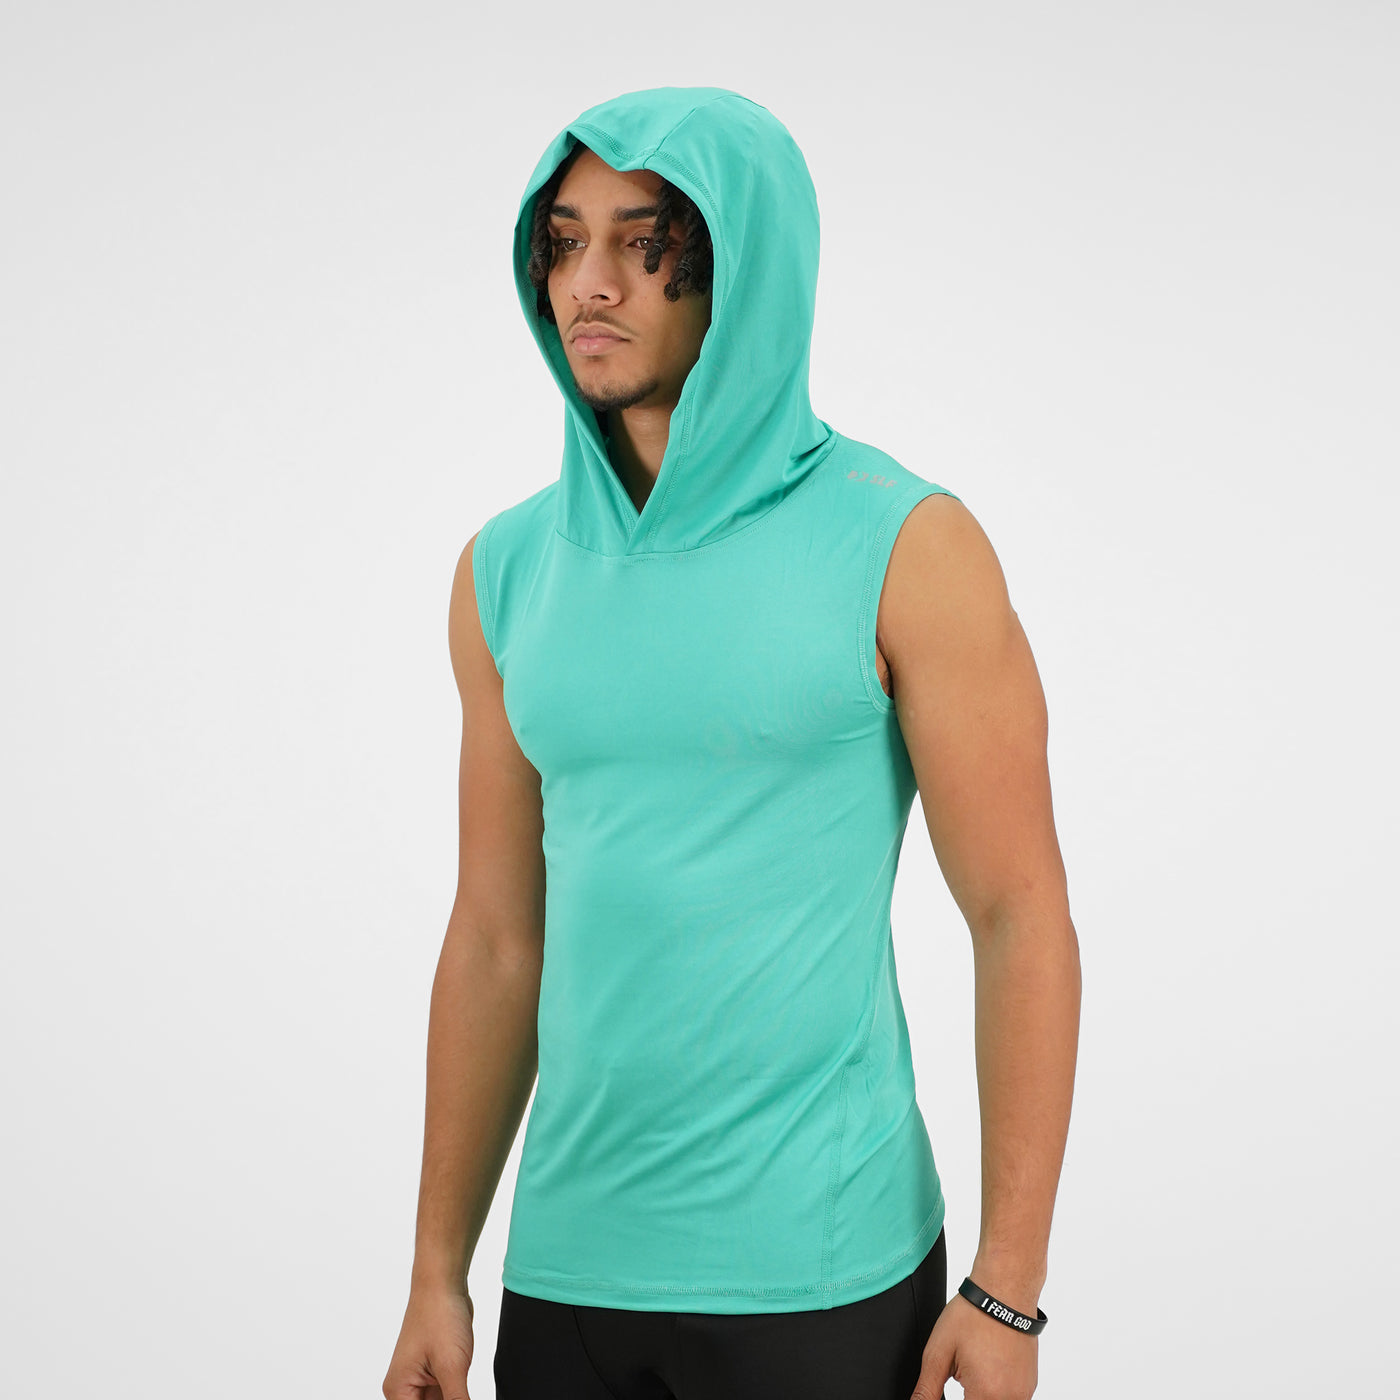 Teal Sleeveless Compression Hoodie